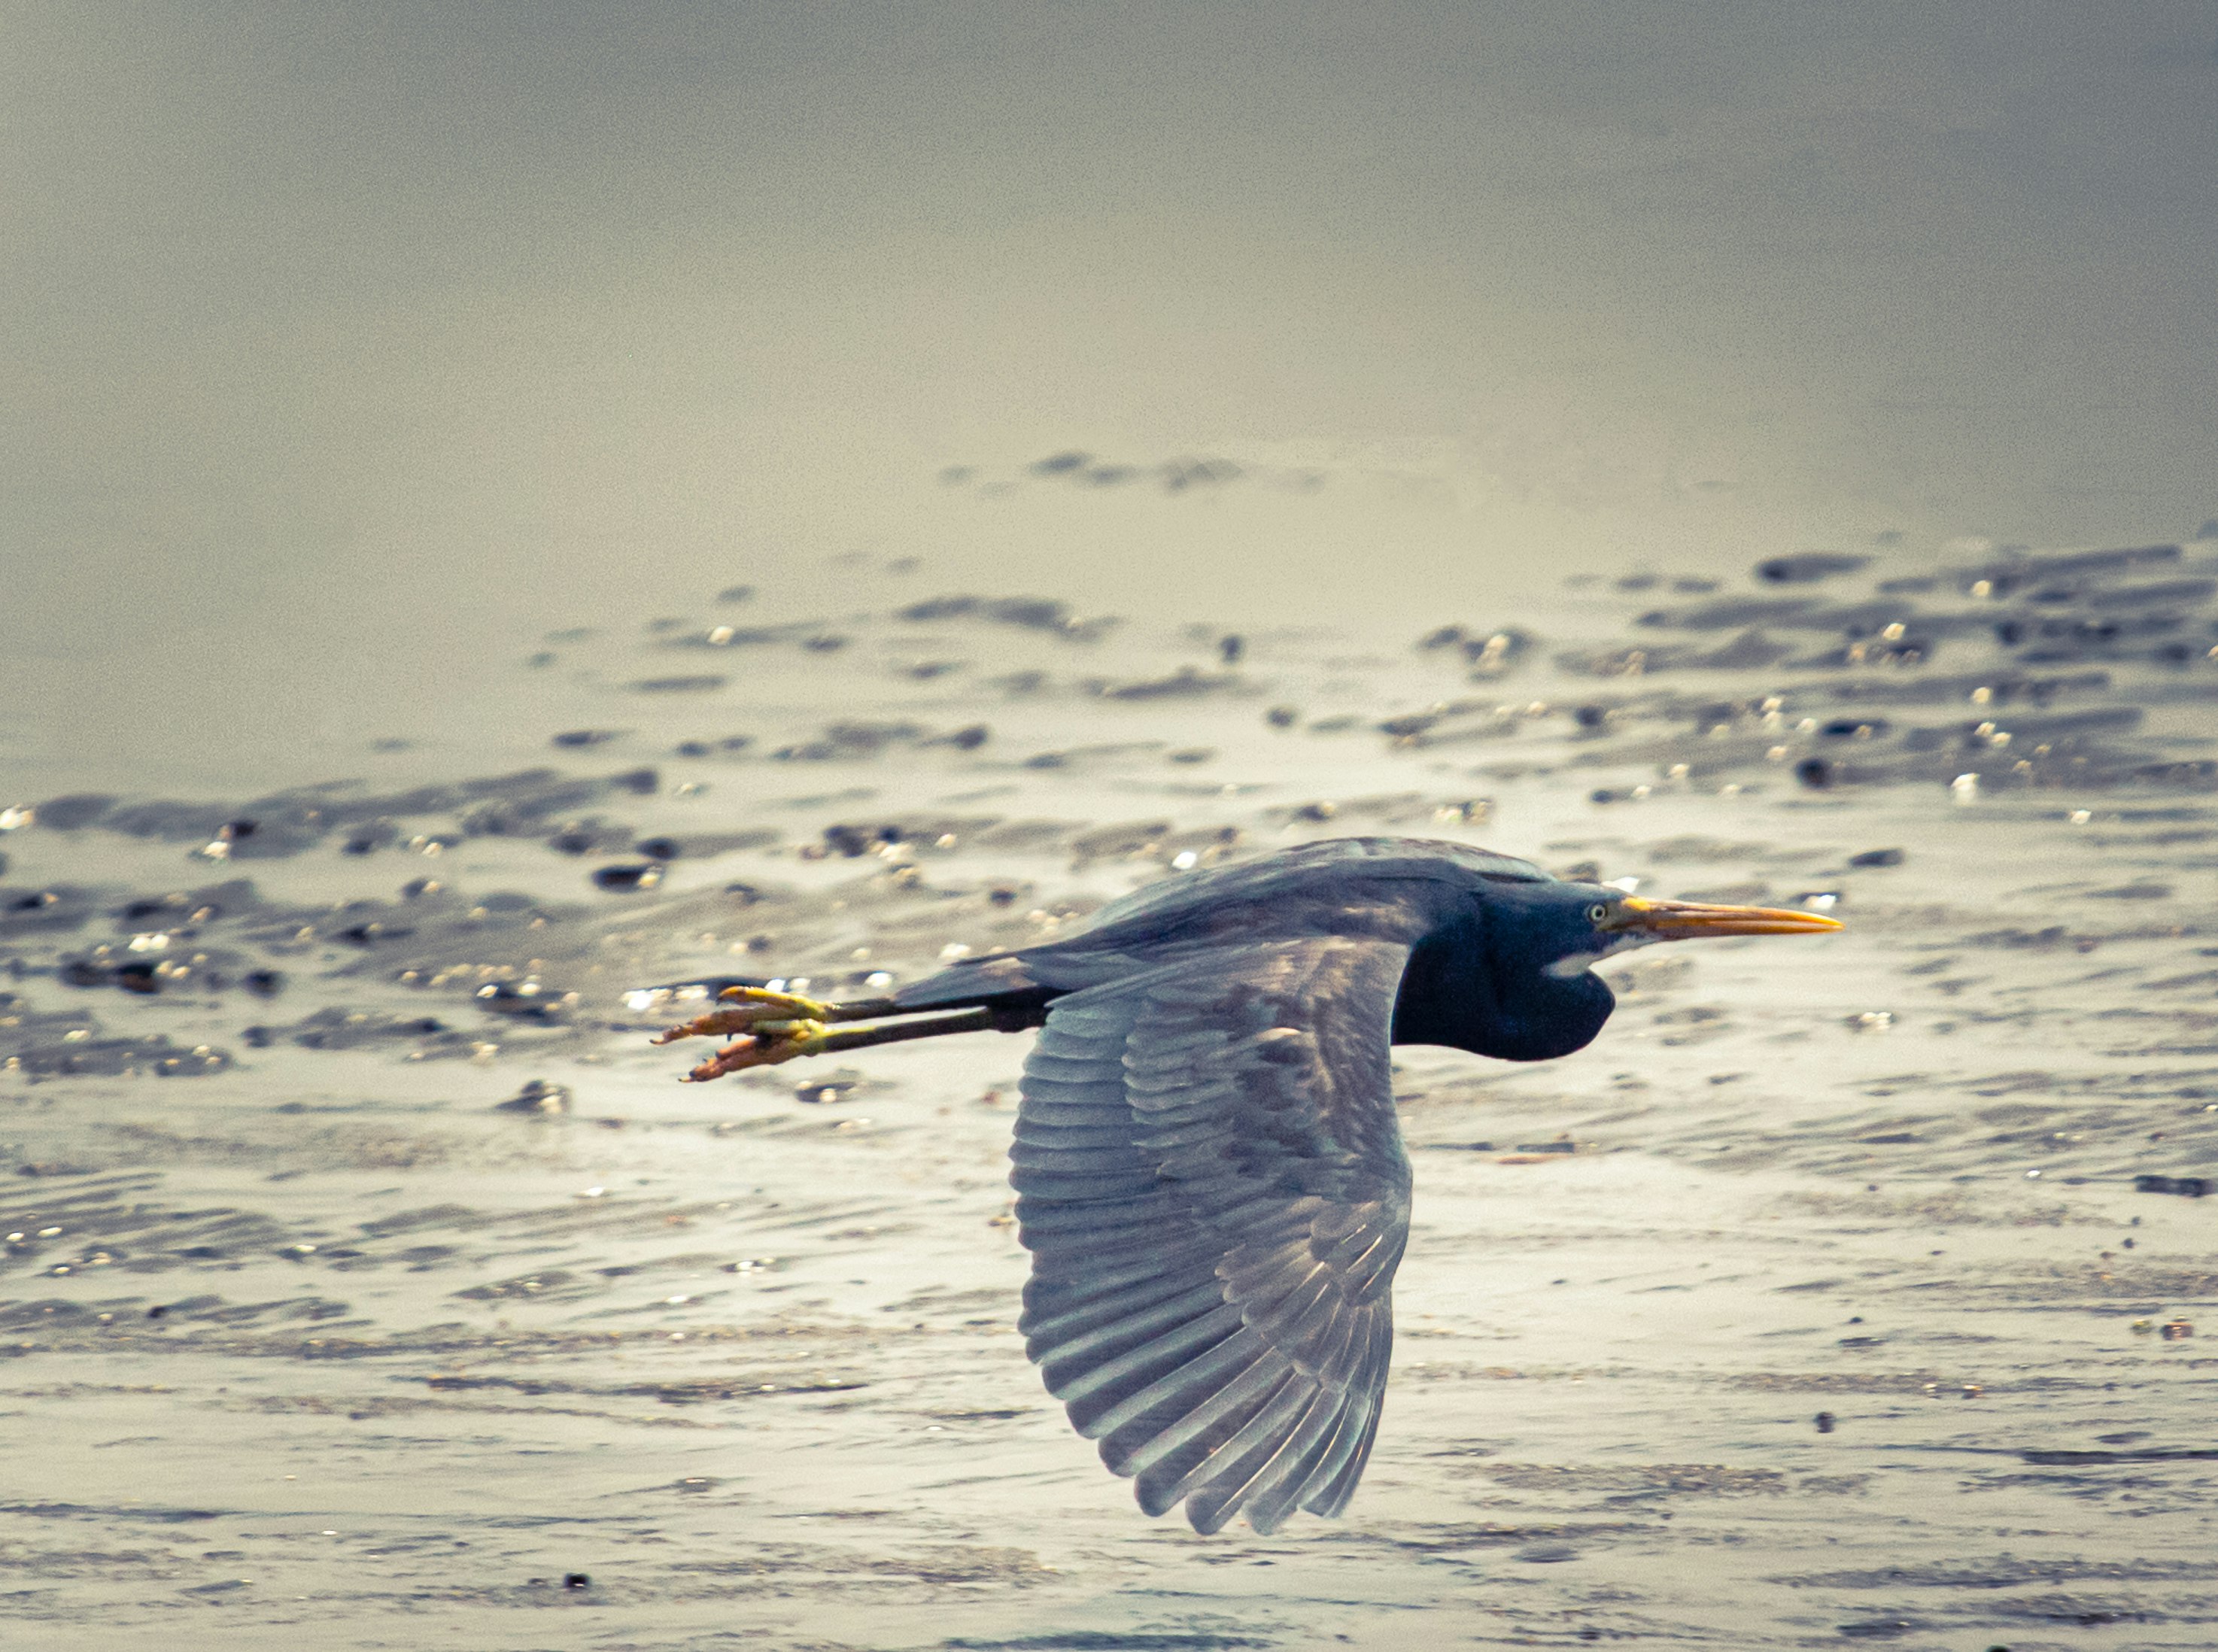 blue heron flying over the sea during daytime